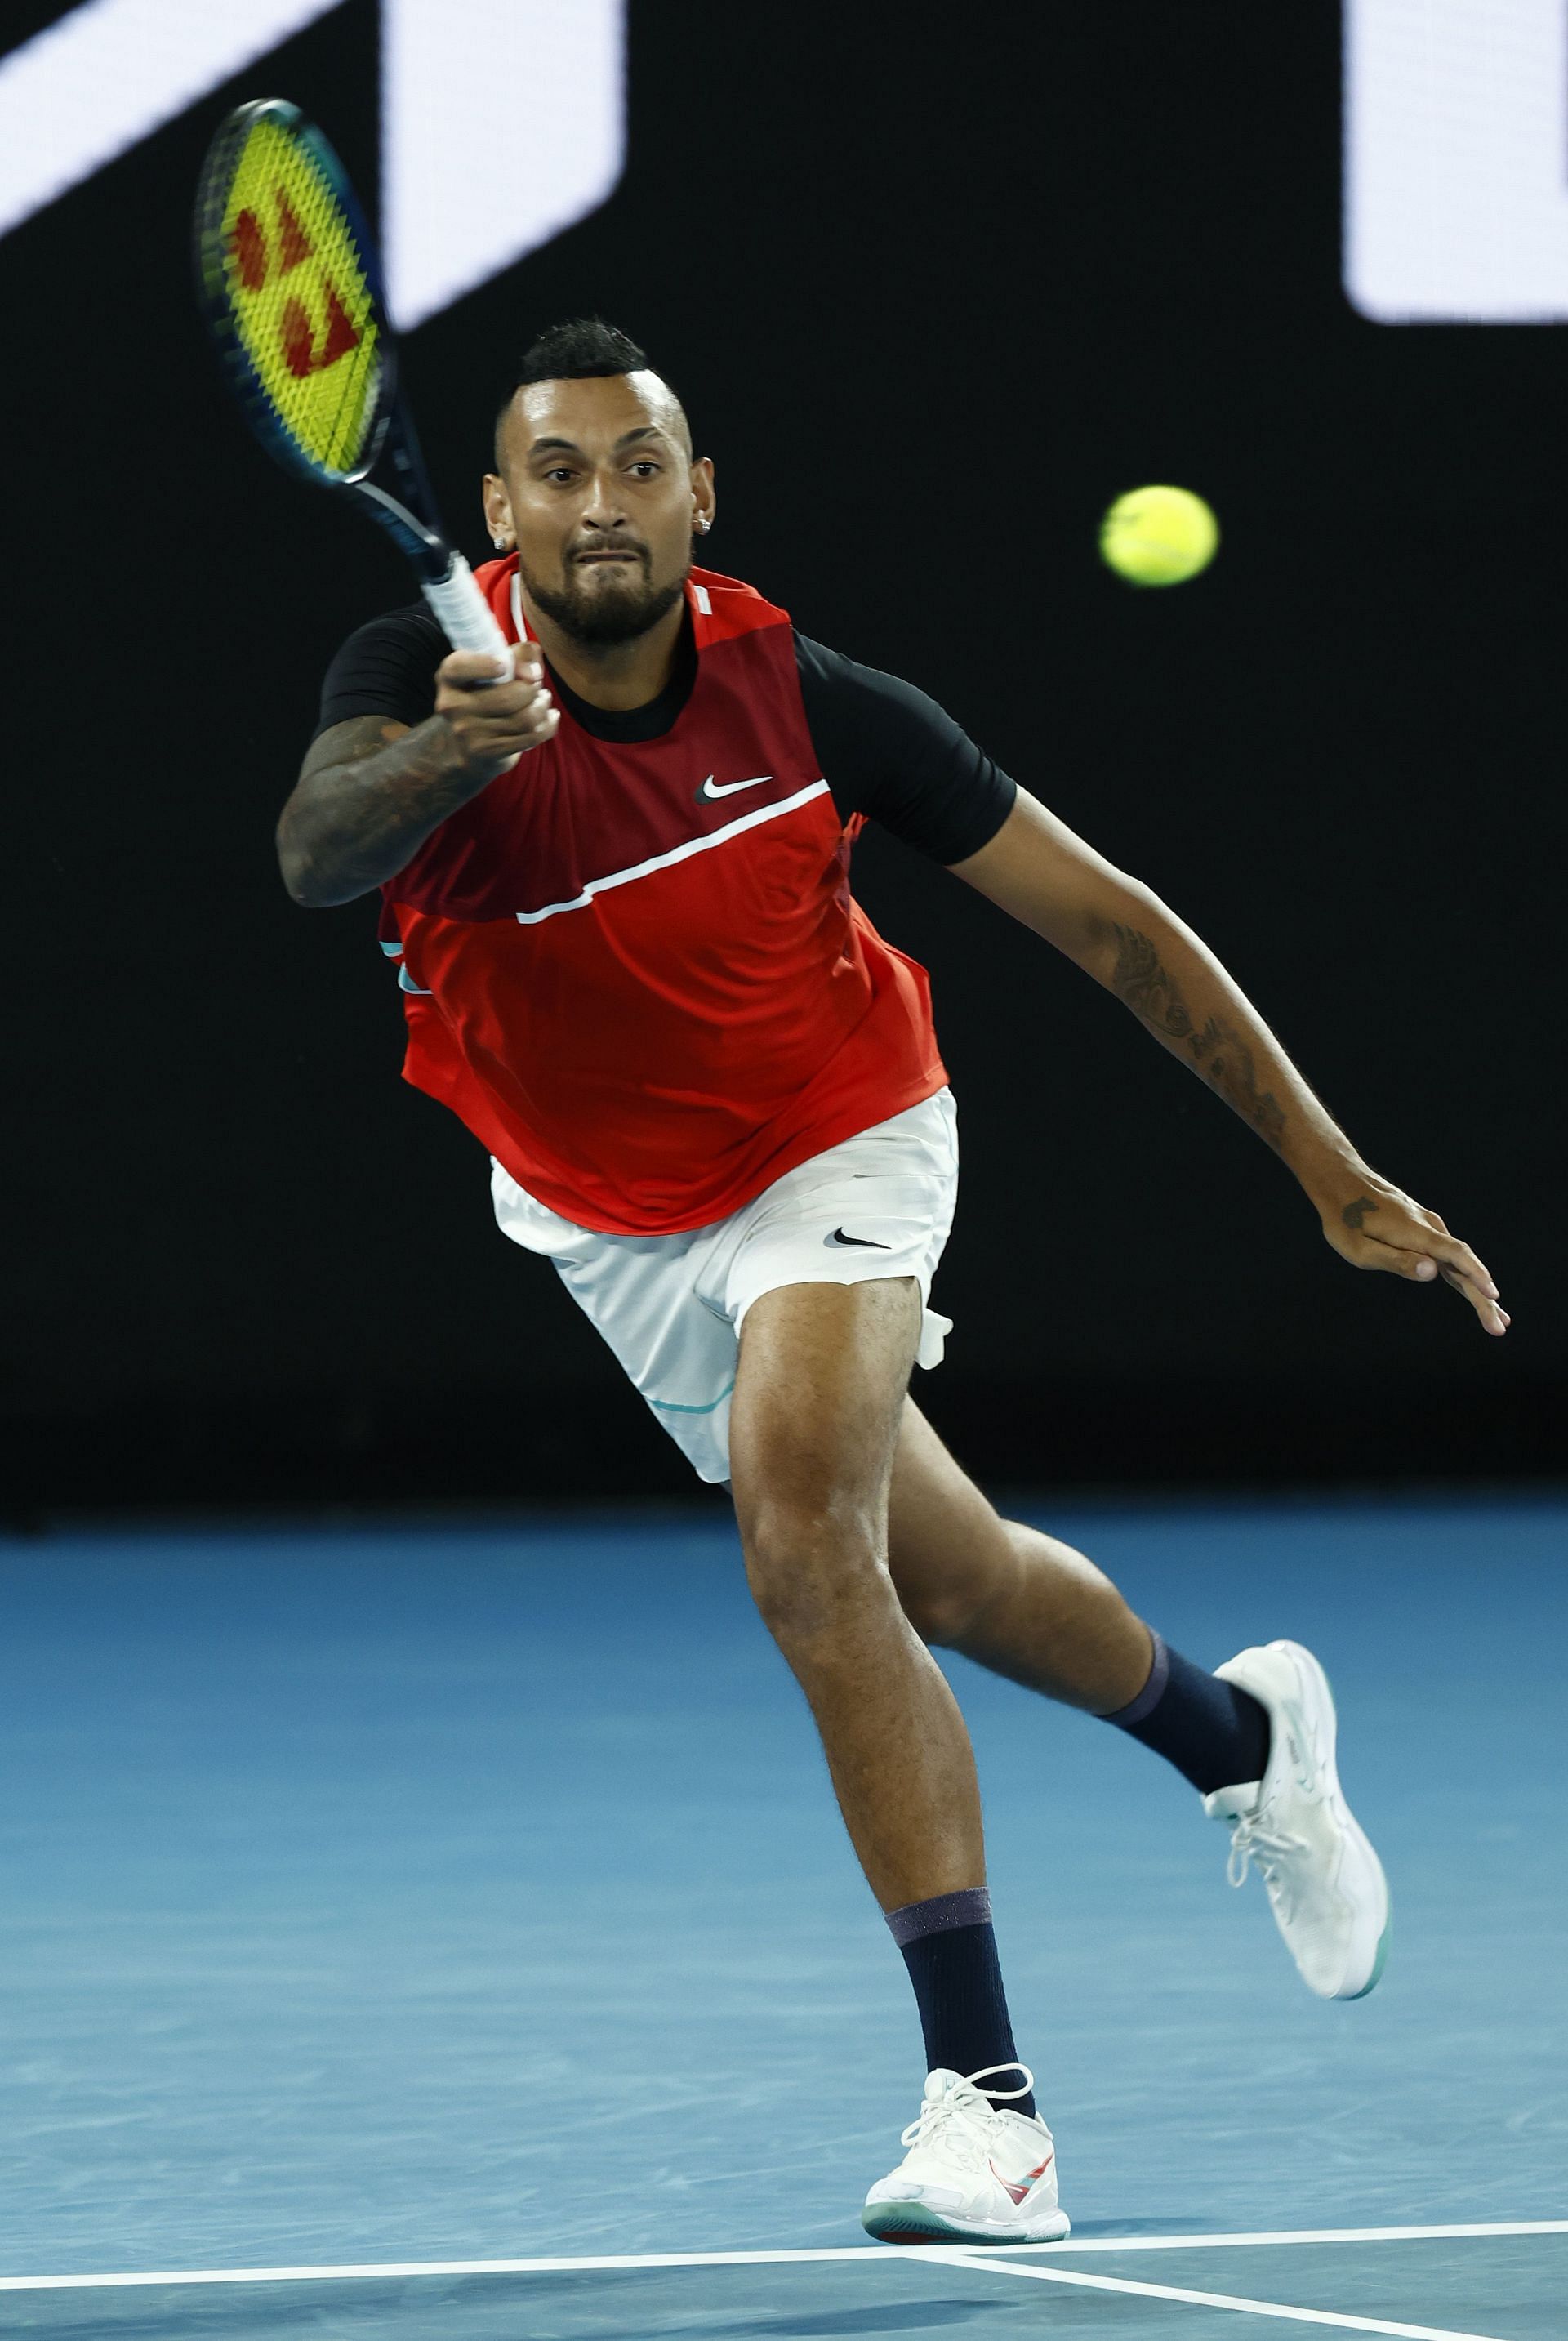 The former World No. 13 in action at the 2022 Australian Open